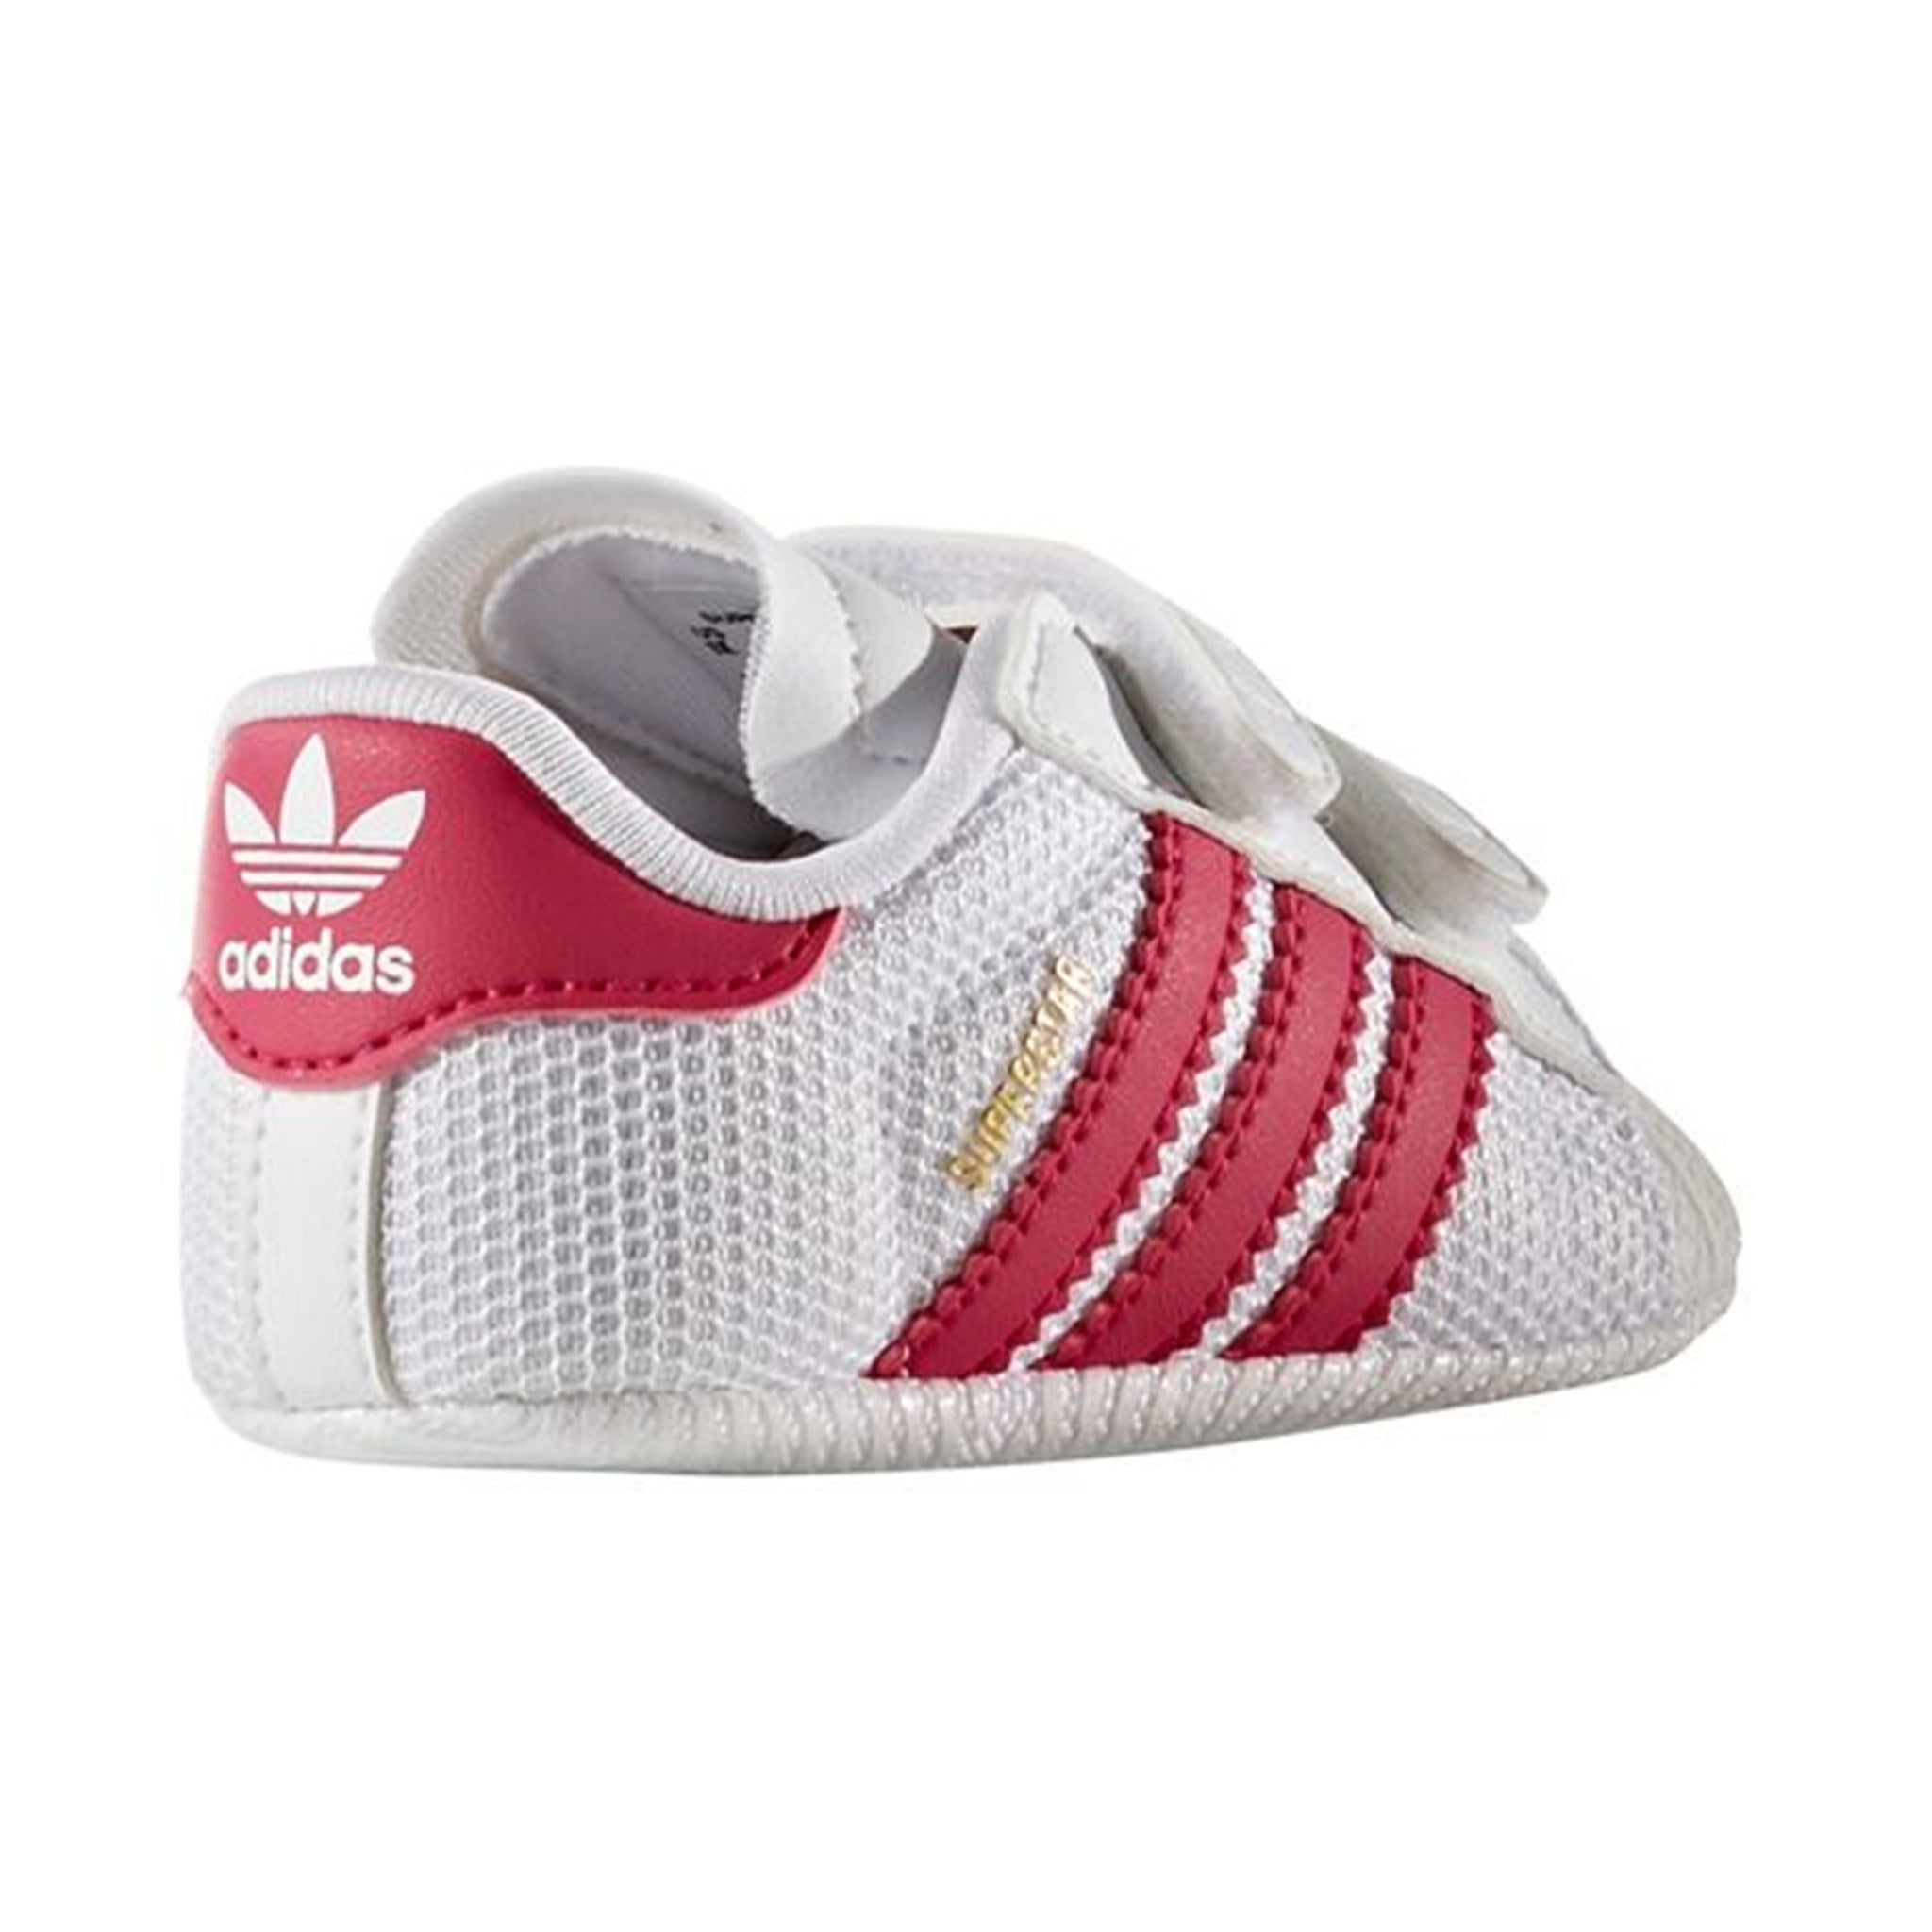 adidas Baby Superstar Sneakers White/Pink 2